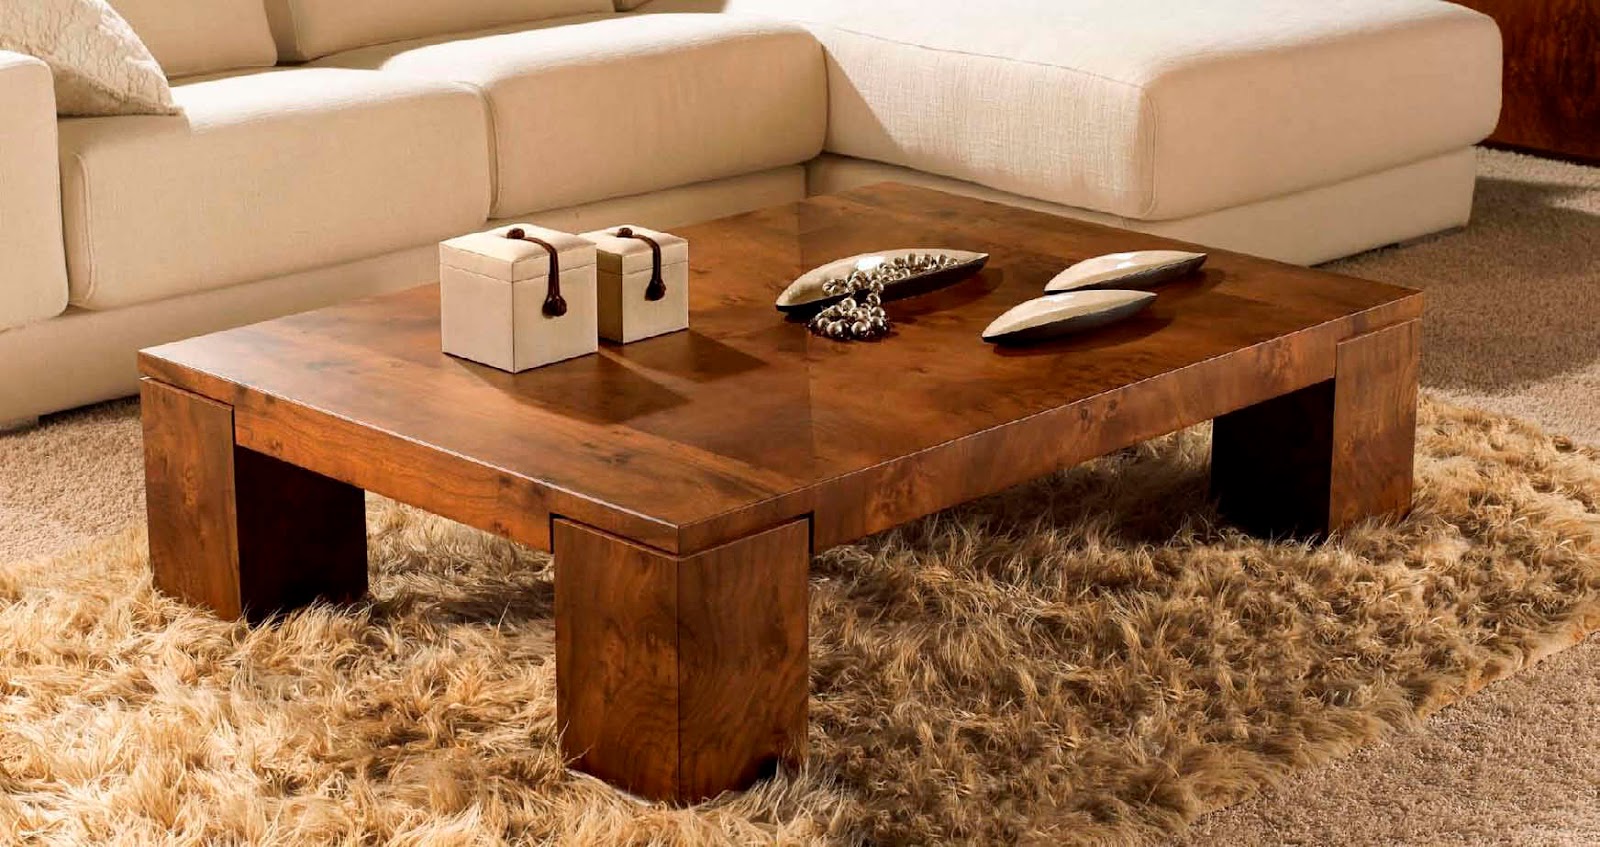 Modern Wooden Coffee Table For Living Room